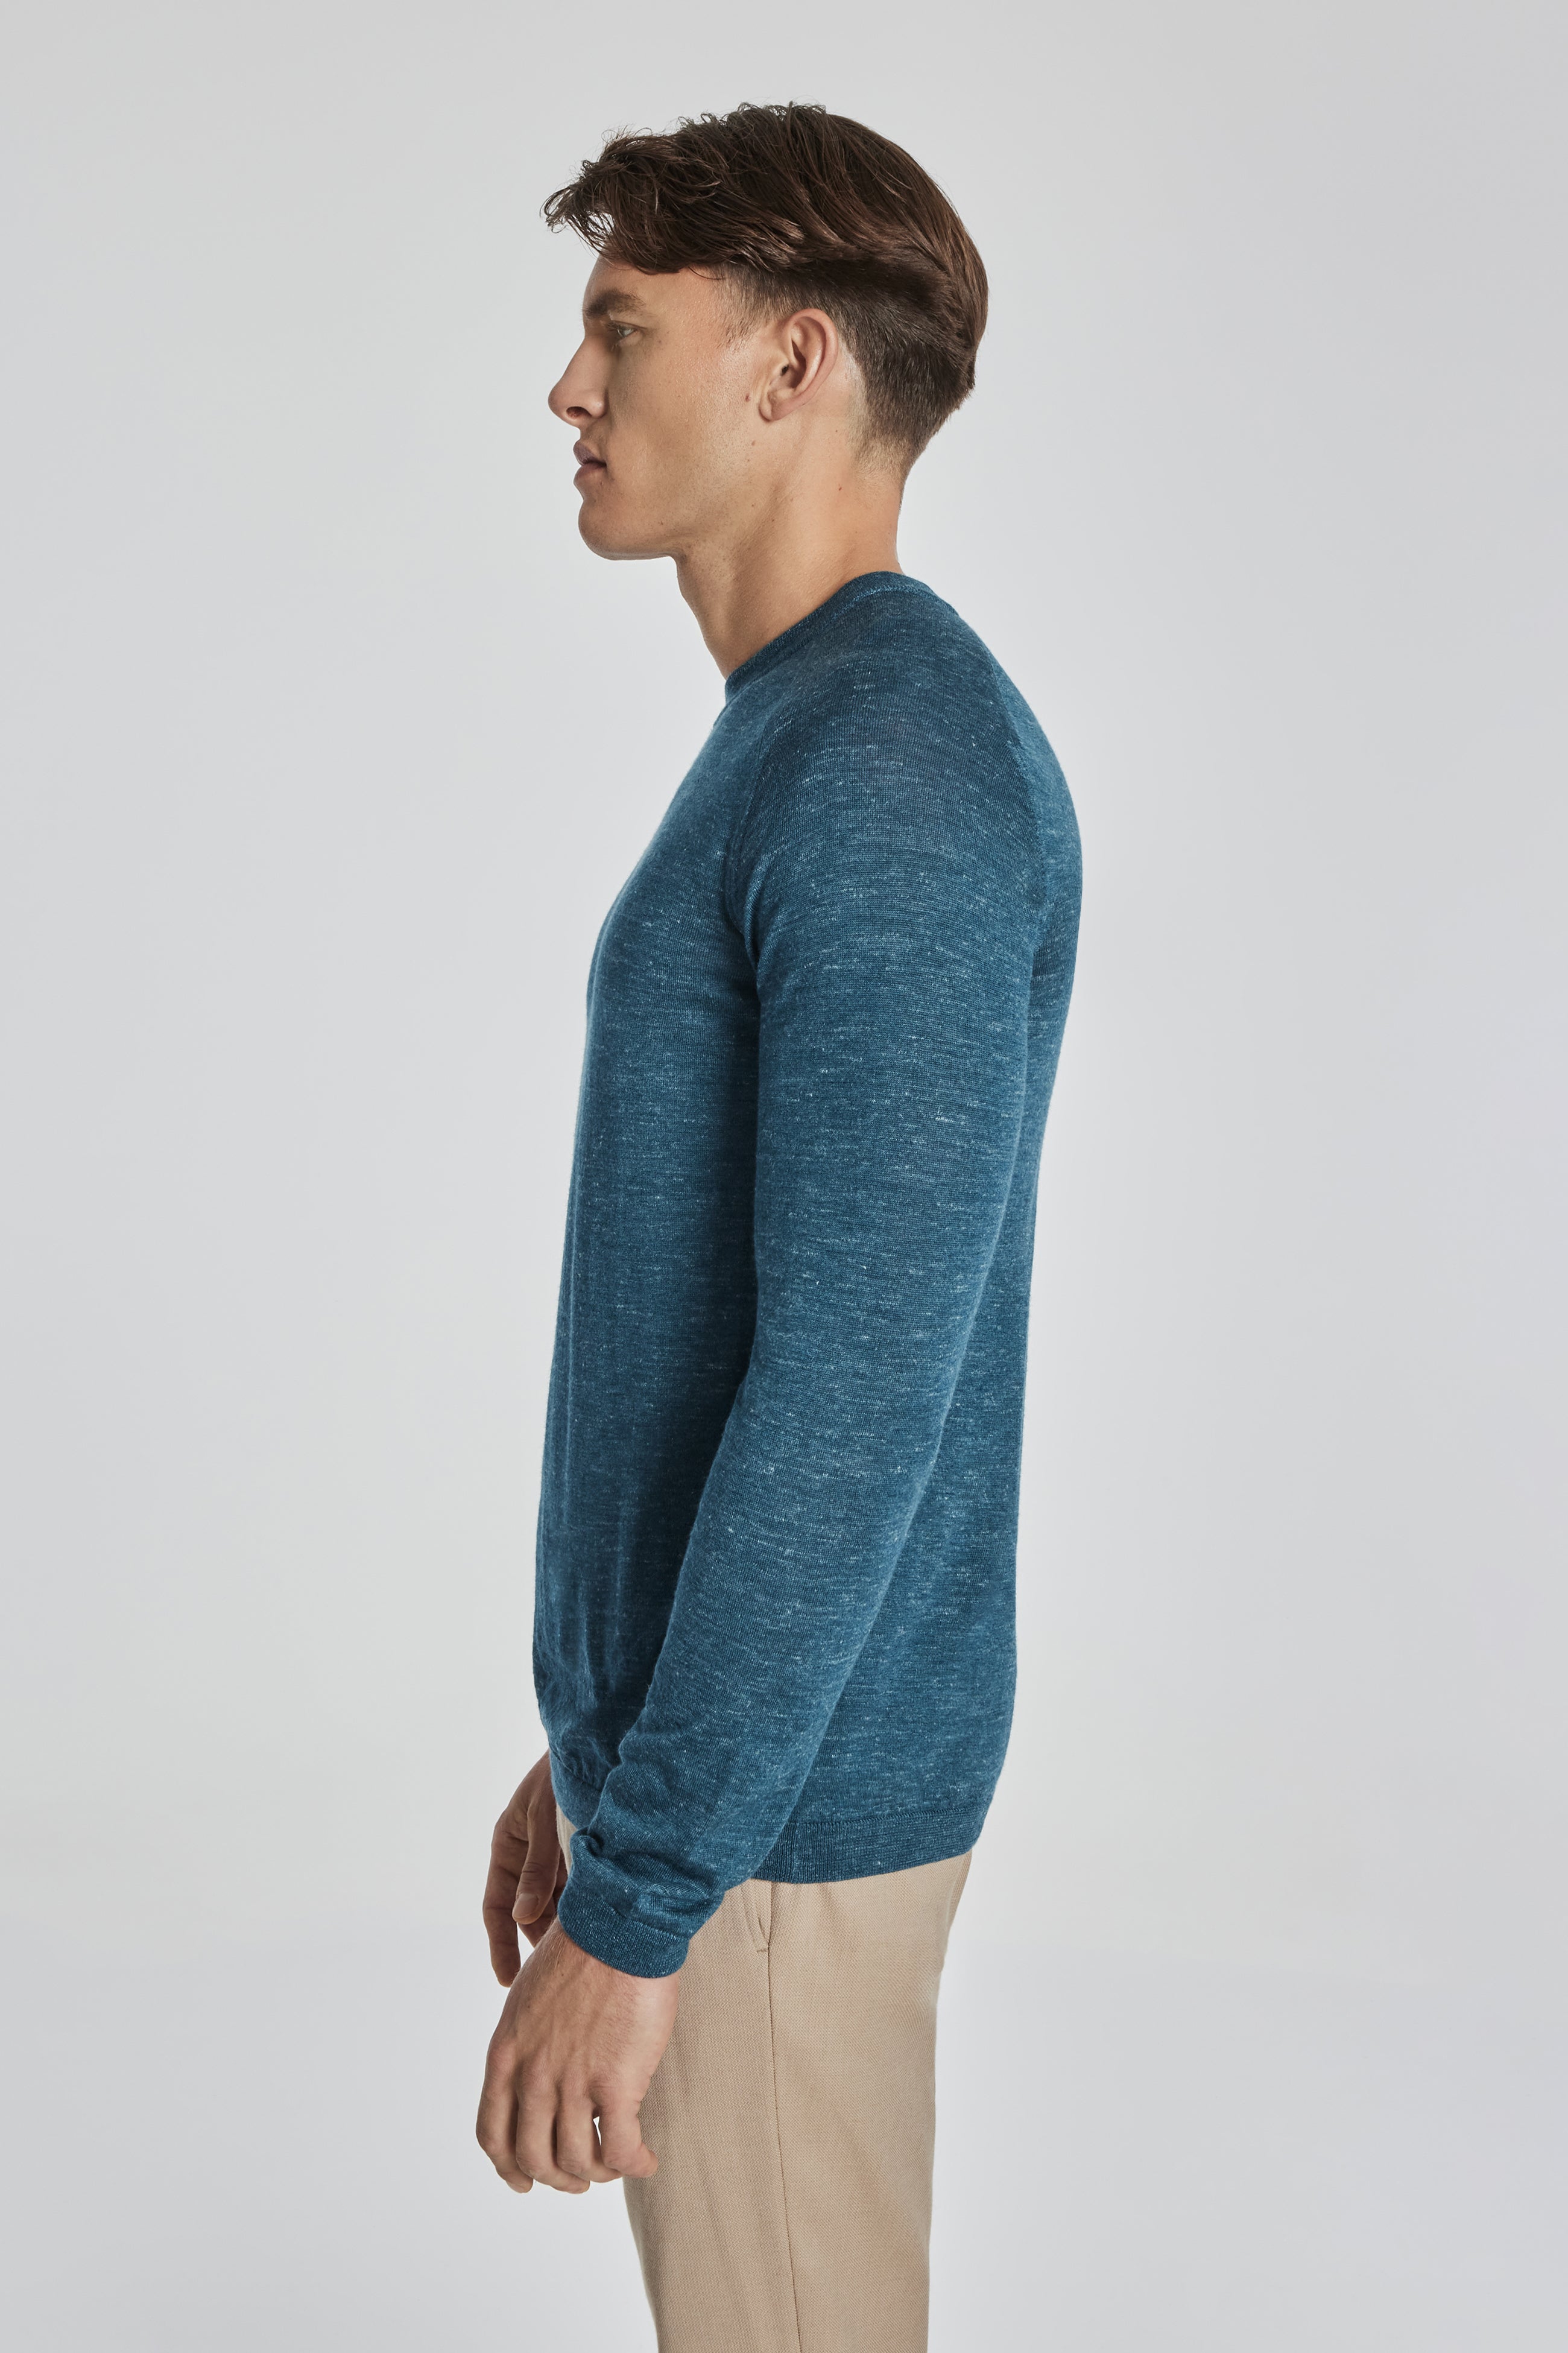 Alt view 3 Bailey Solid Merino Wool, Silk and Linen Long Sleeve Crew in Teal